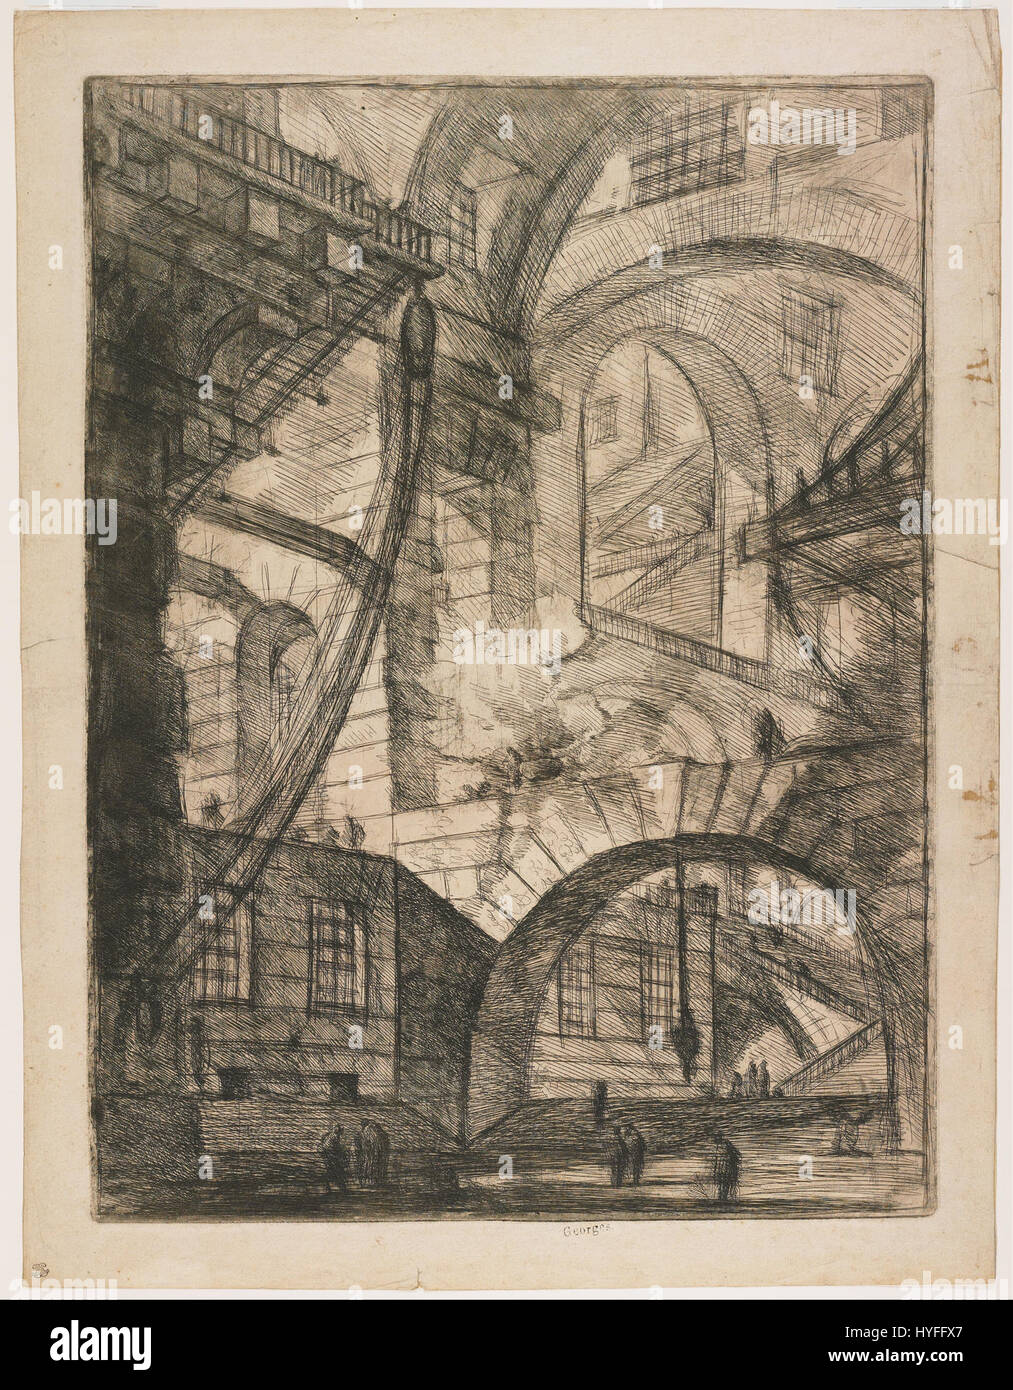 Giovanni Battista Piranesi   Perspective of Arches, with a Smoking Fire, Plate 6 from Carceri d'Invenzione   Google Art Project Stock Photo